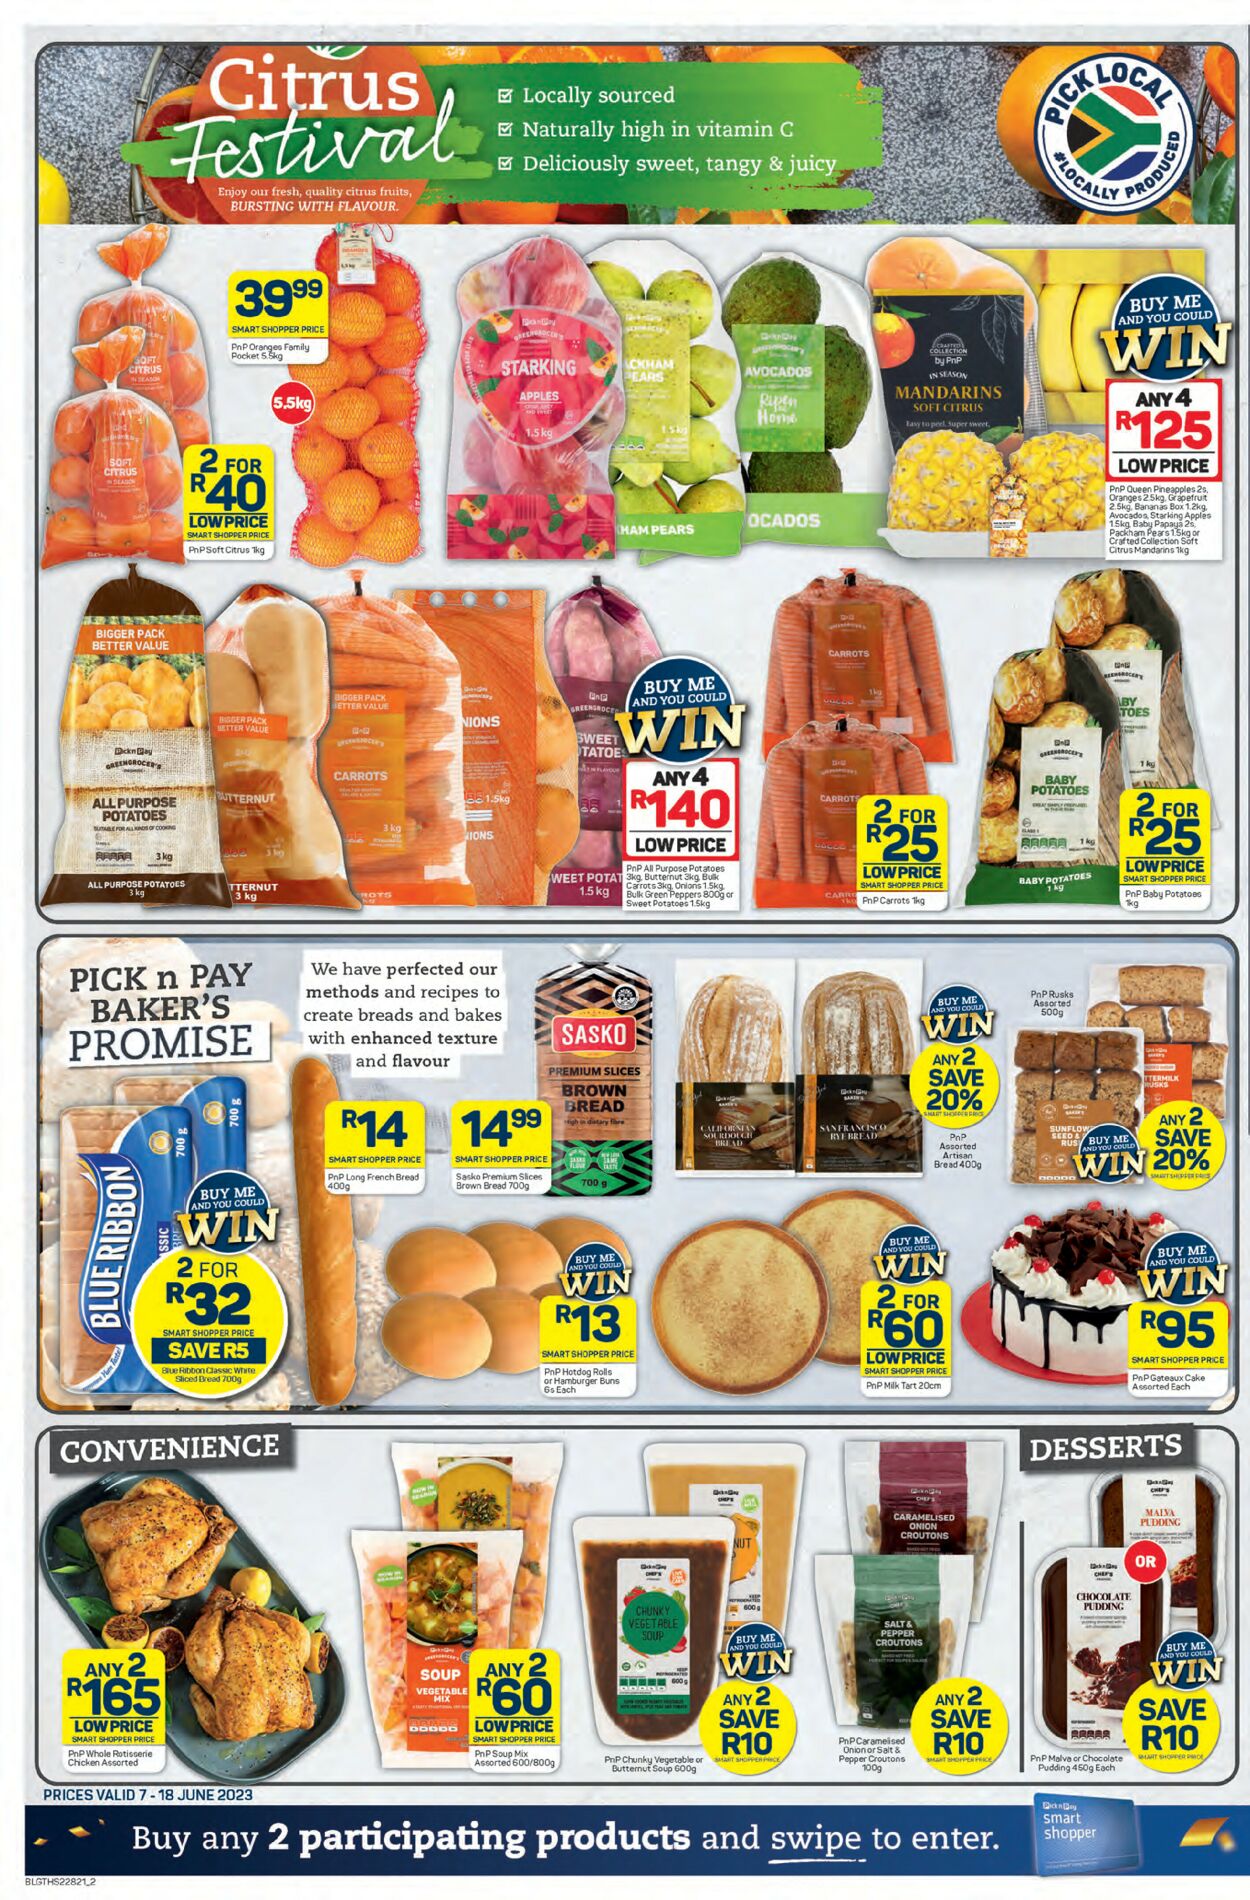 Pick n Pay Catalogue - 2023/06/07-2023/06/18 (Page 2)